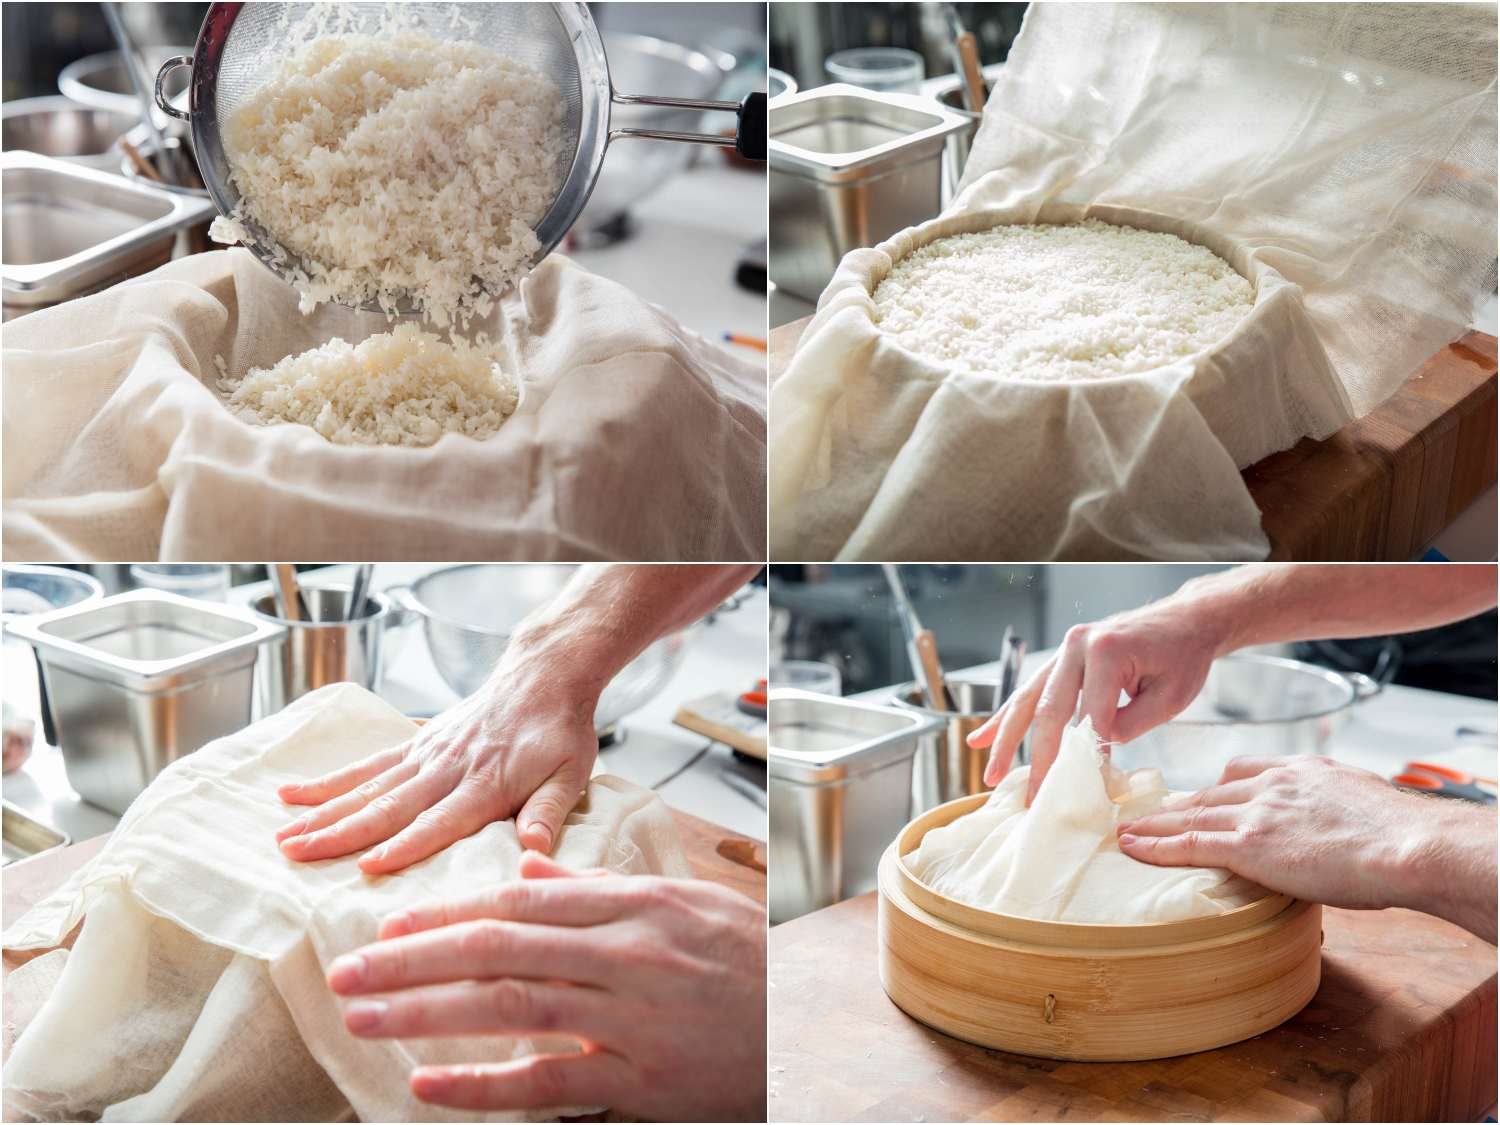 Process shots of placing glutinous rice in a cheesecloth parcel to steam in a bamboo steamer.